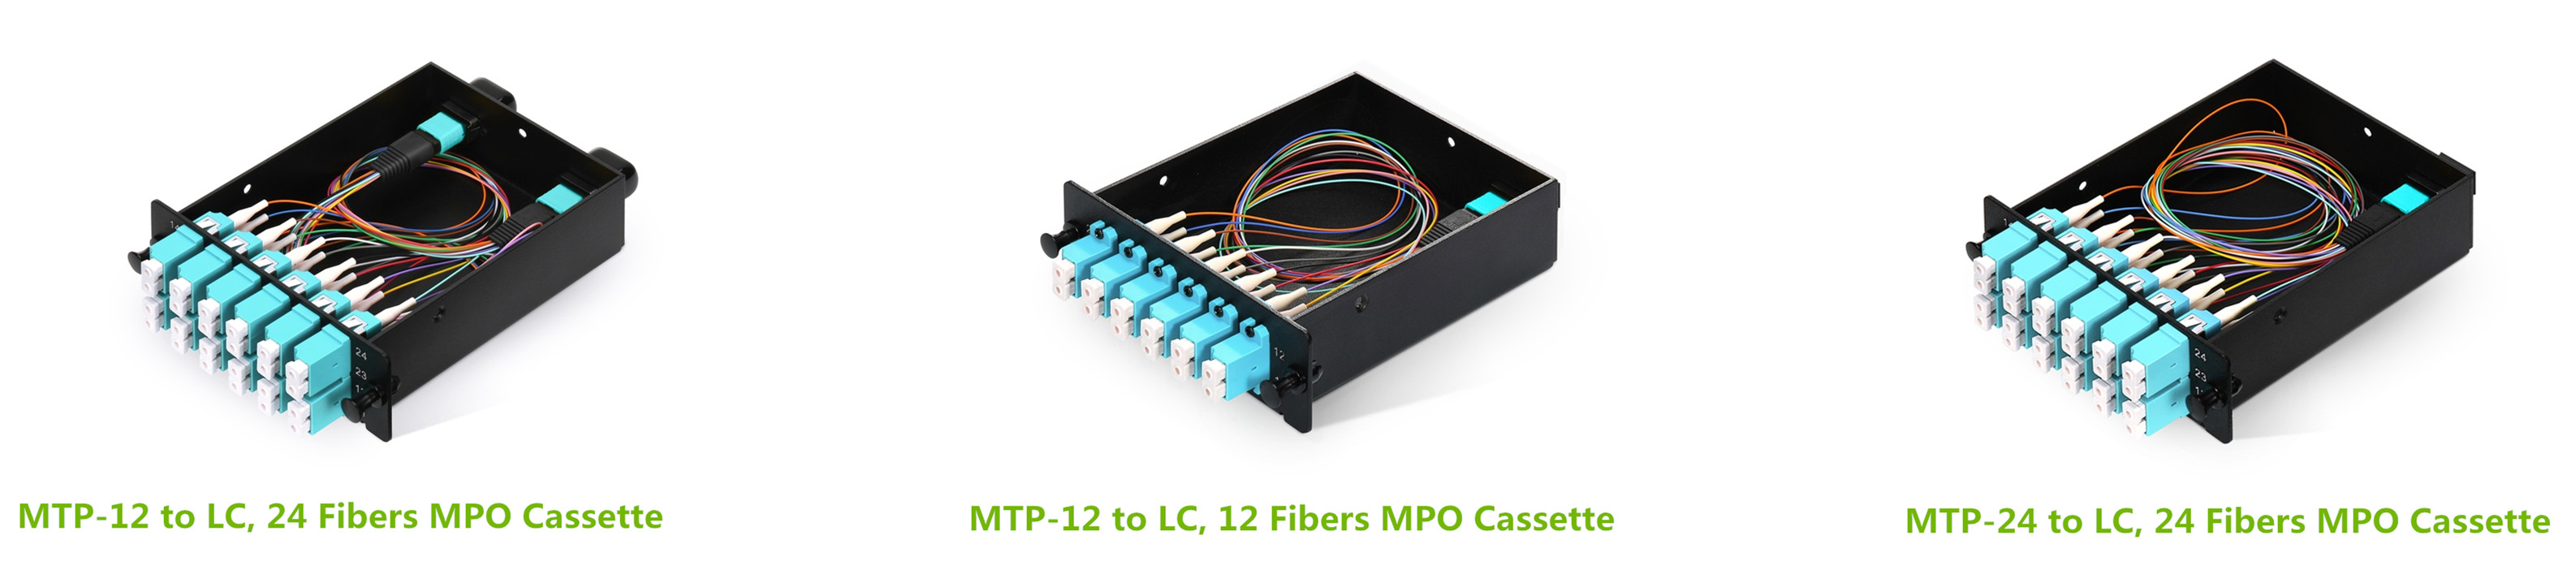 MTP-12 and MTP-24 MPO cassettes